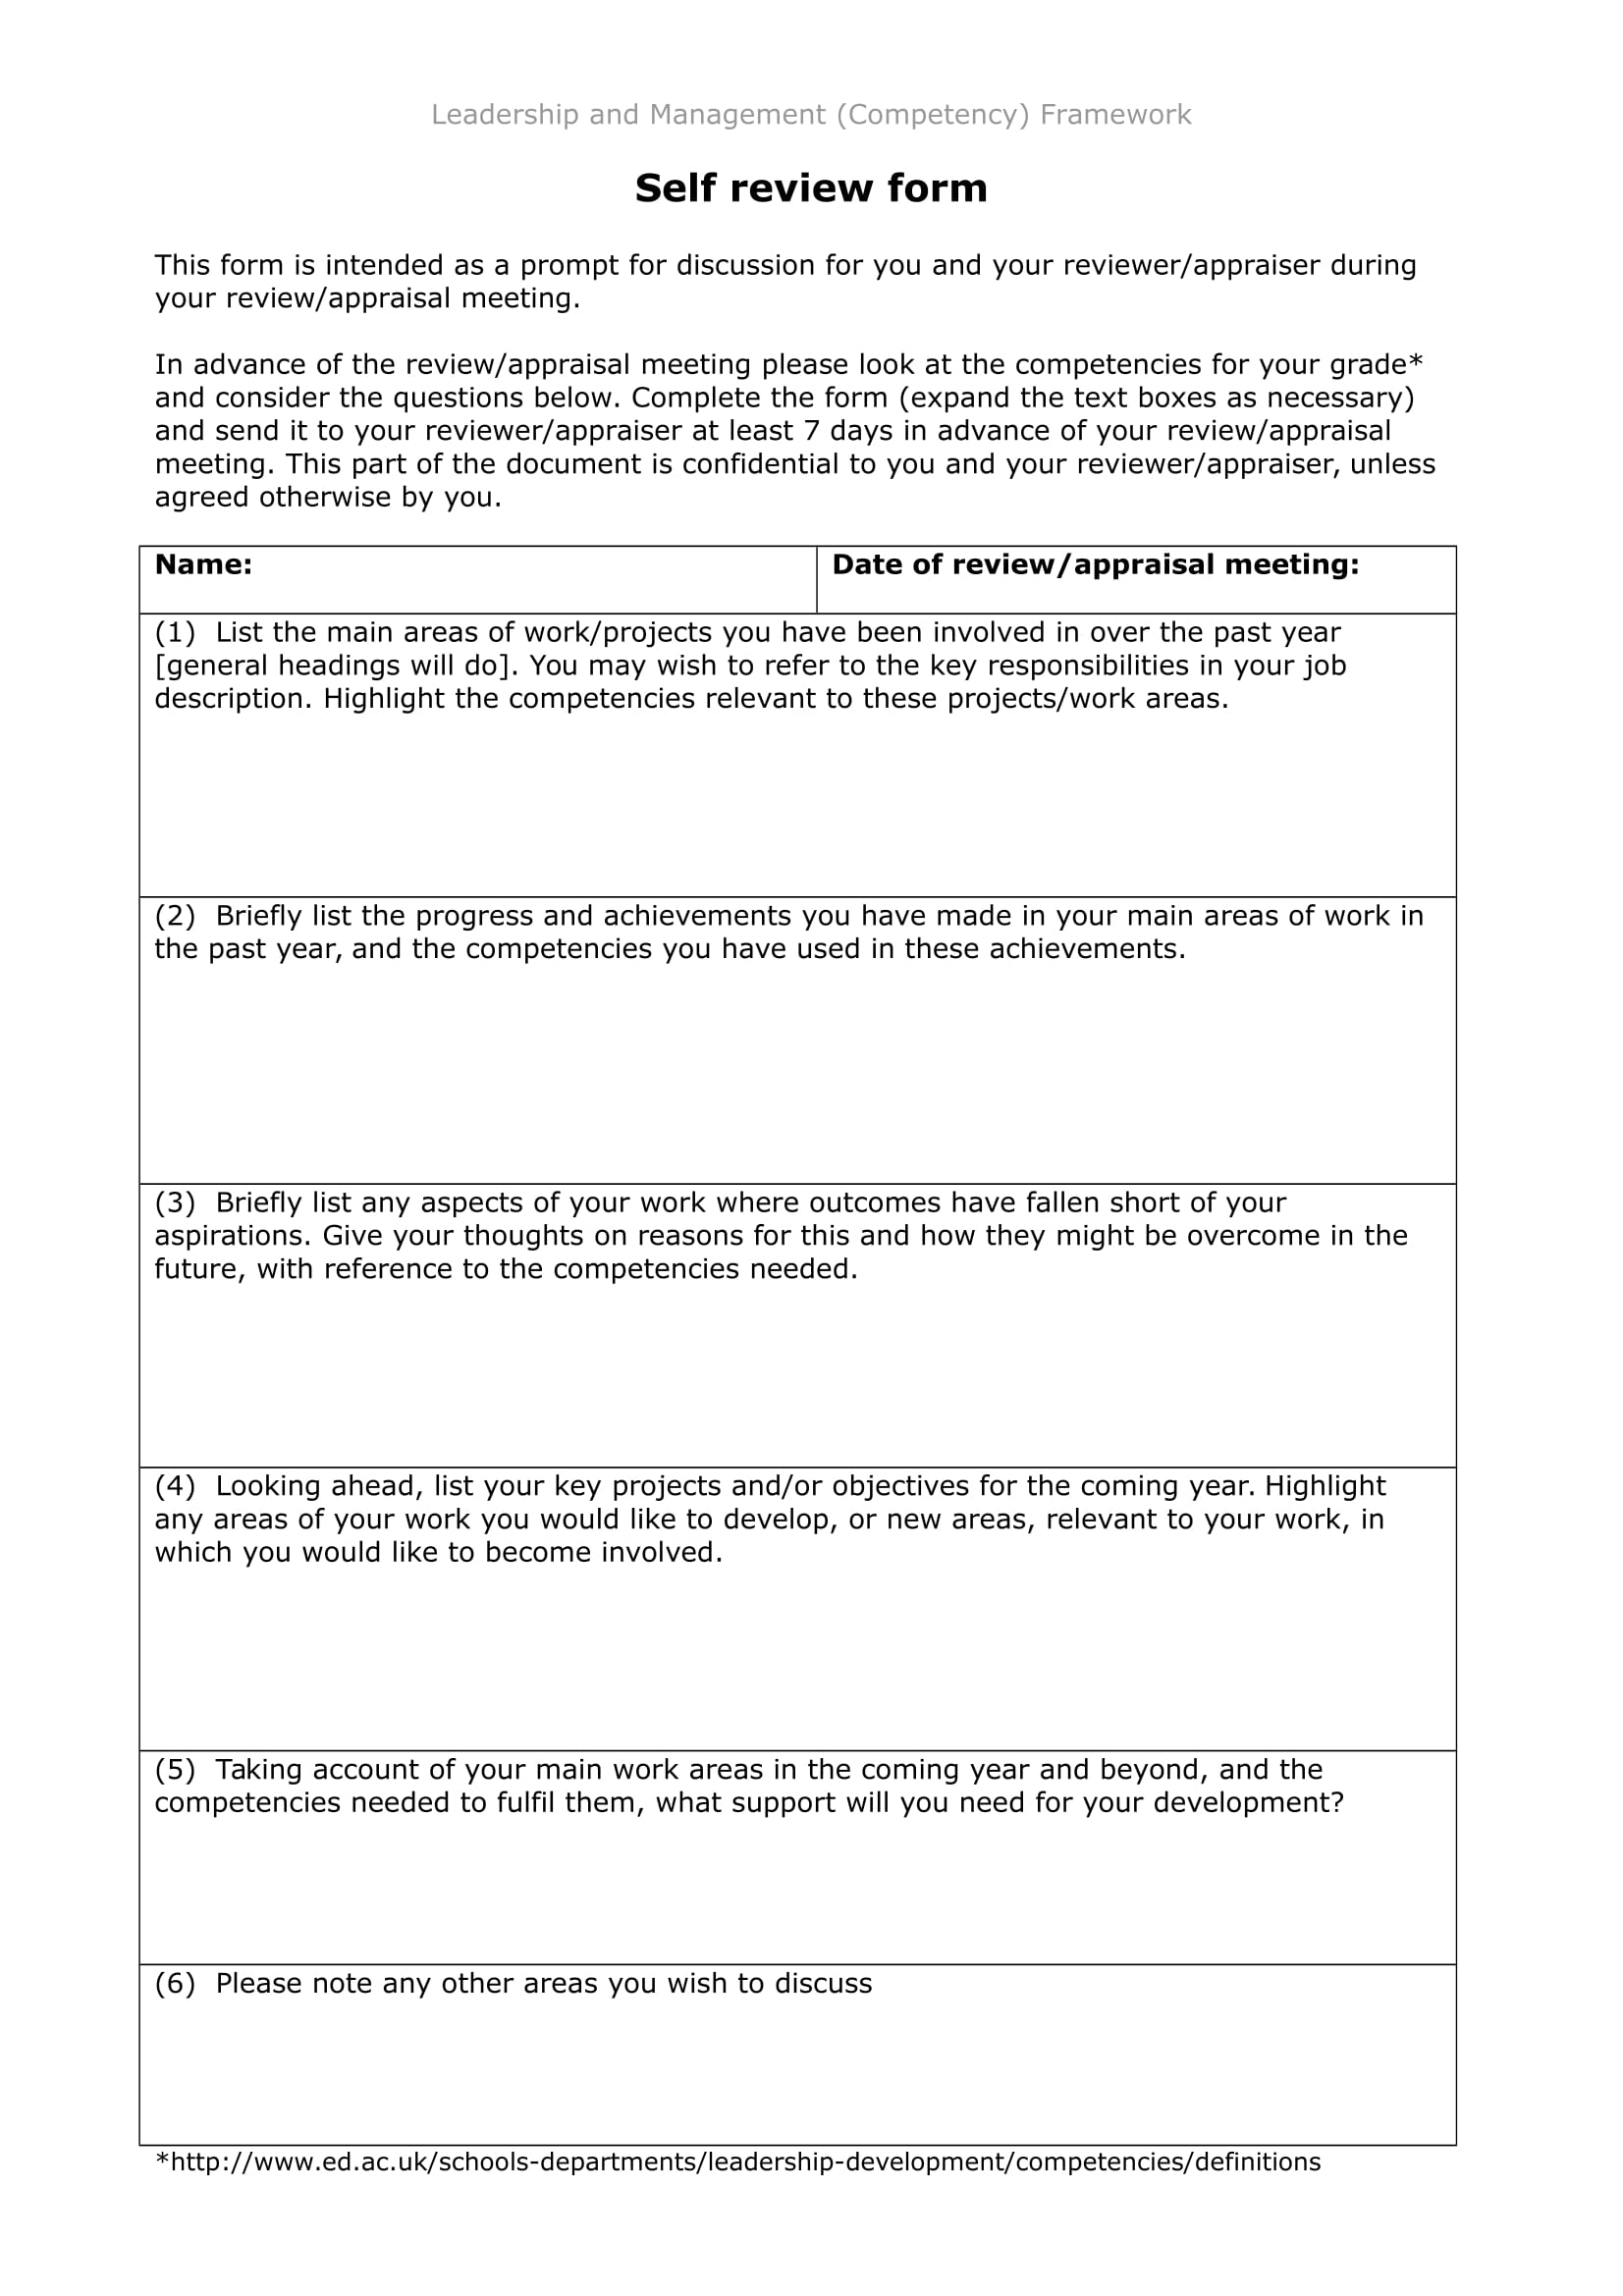 appraisal or self review form 1